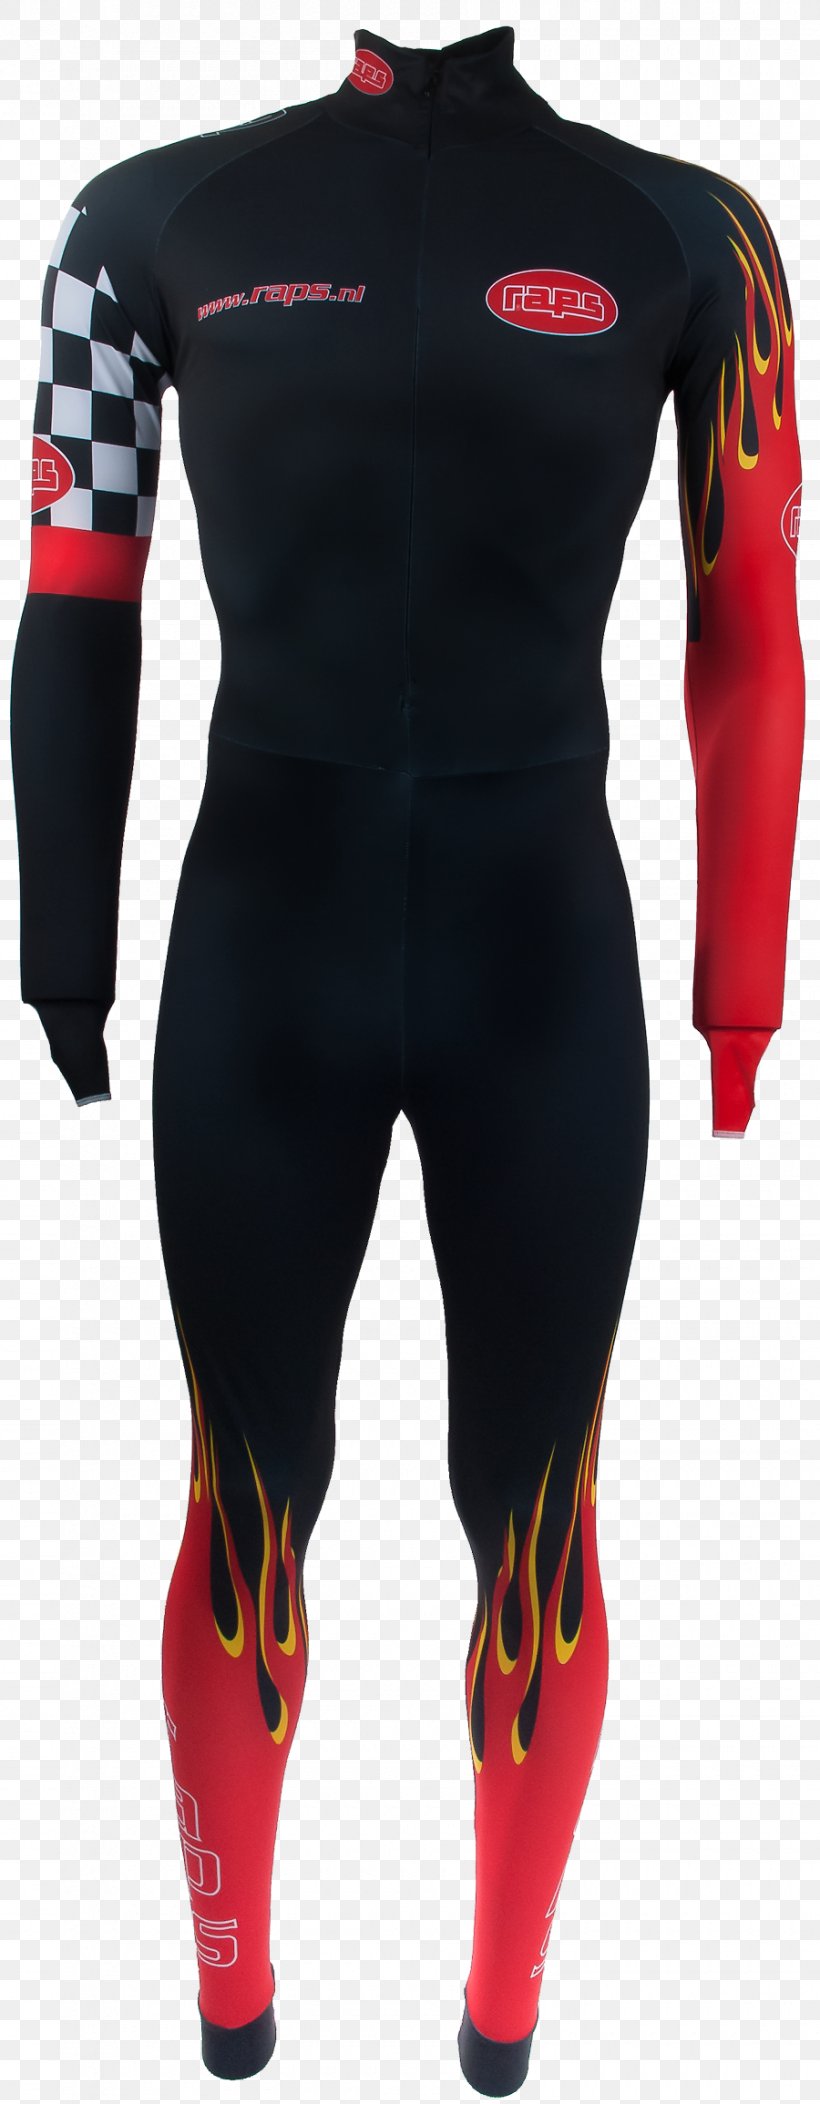 Wetsuit, PNG, 900x2310px, Wetsuit, Personal Protective Equipment, Sleeve, Sportswear Download Free